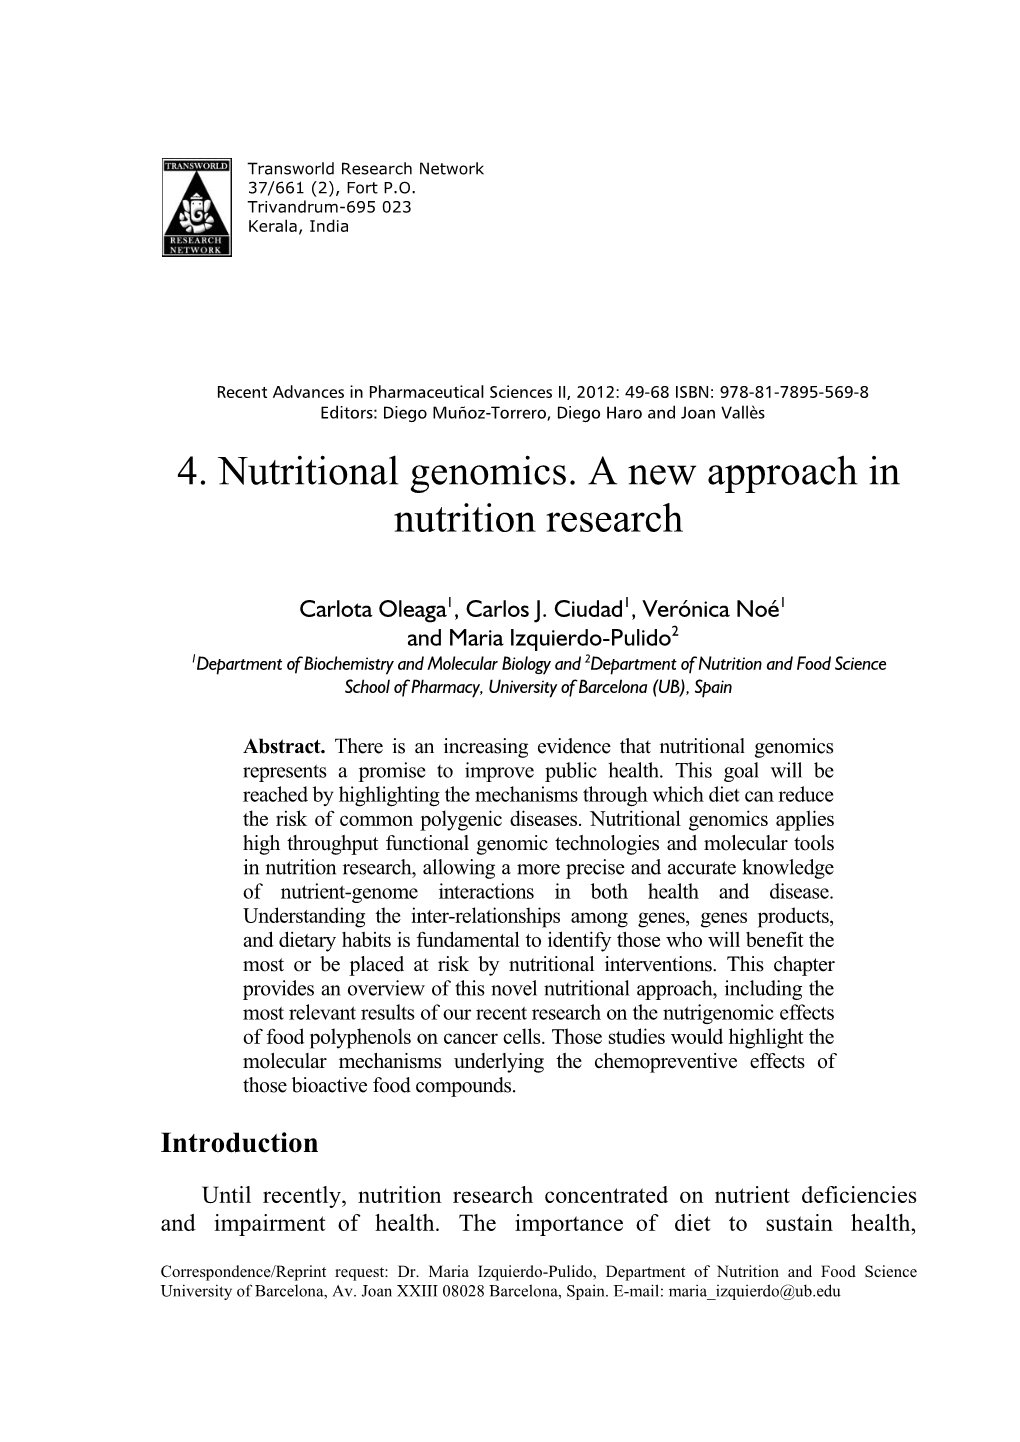 4. Nutritional Genomics. a New Approach in Nutrition Research